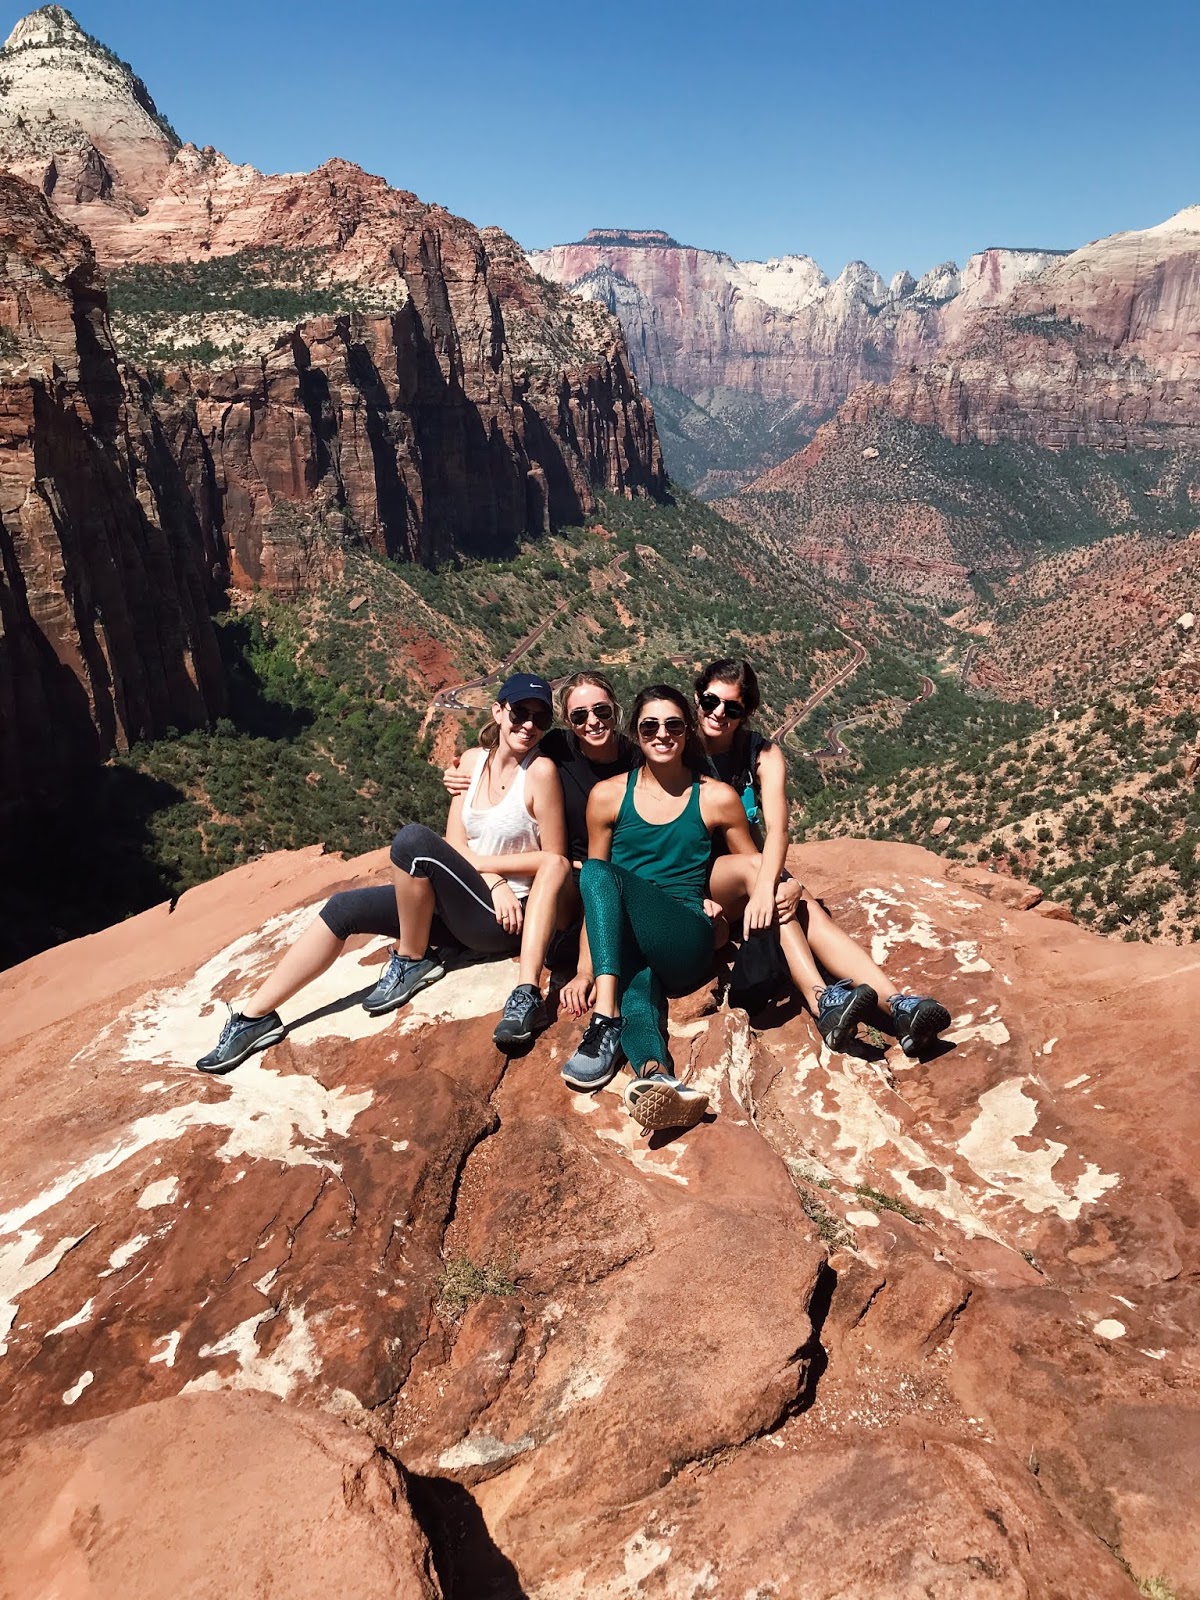 Rd.com travel vacations experiences to the thousands of annual visitors to bryce canyon national park and the surr. Epic Girl S Roadtrip Zion Bryce Canyon Antelope Canyon Horseshoe Bend The Grand Canyon Briana Anderson